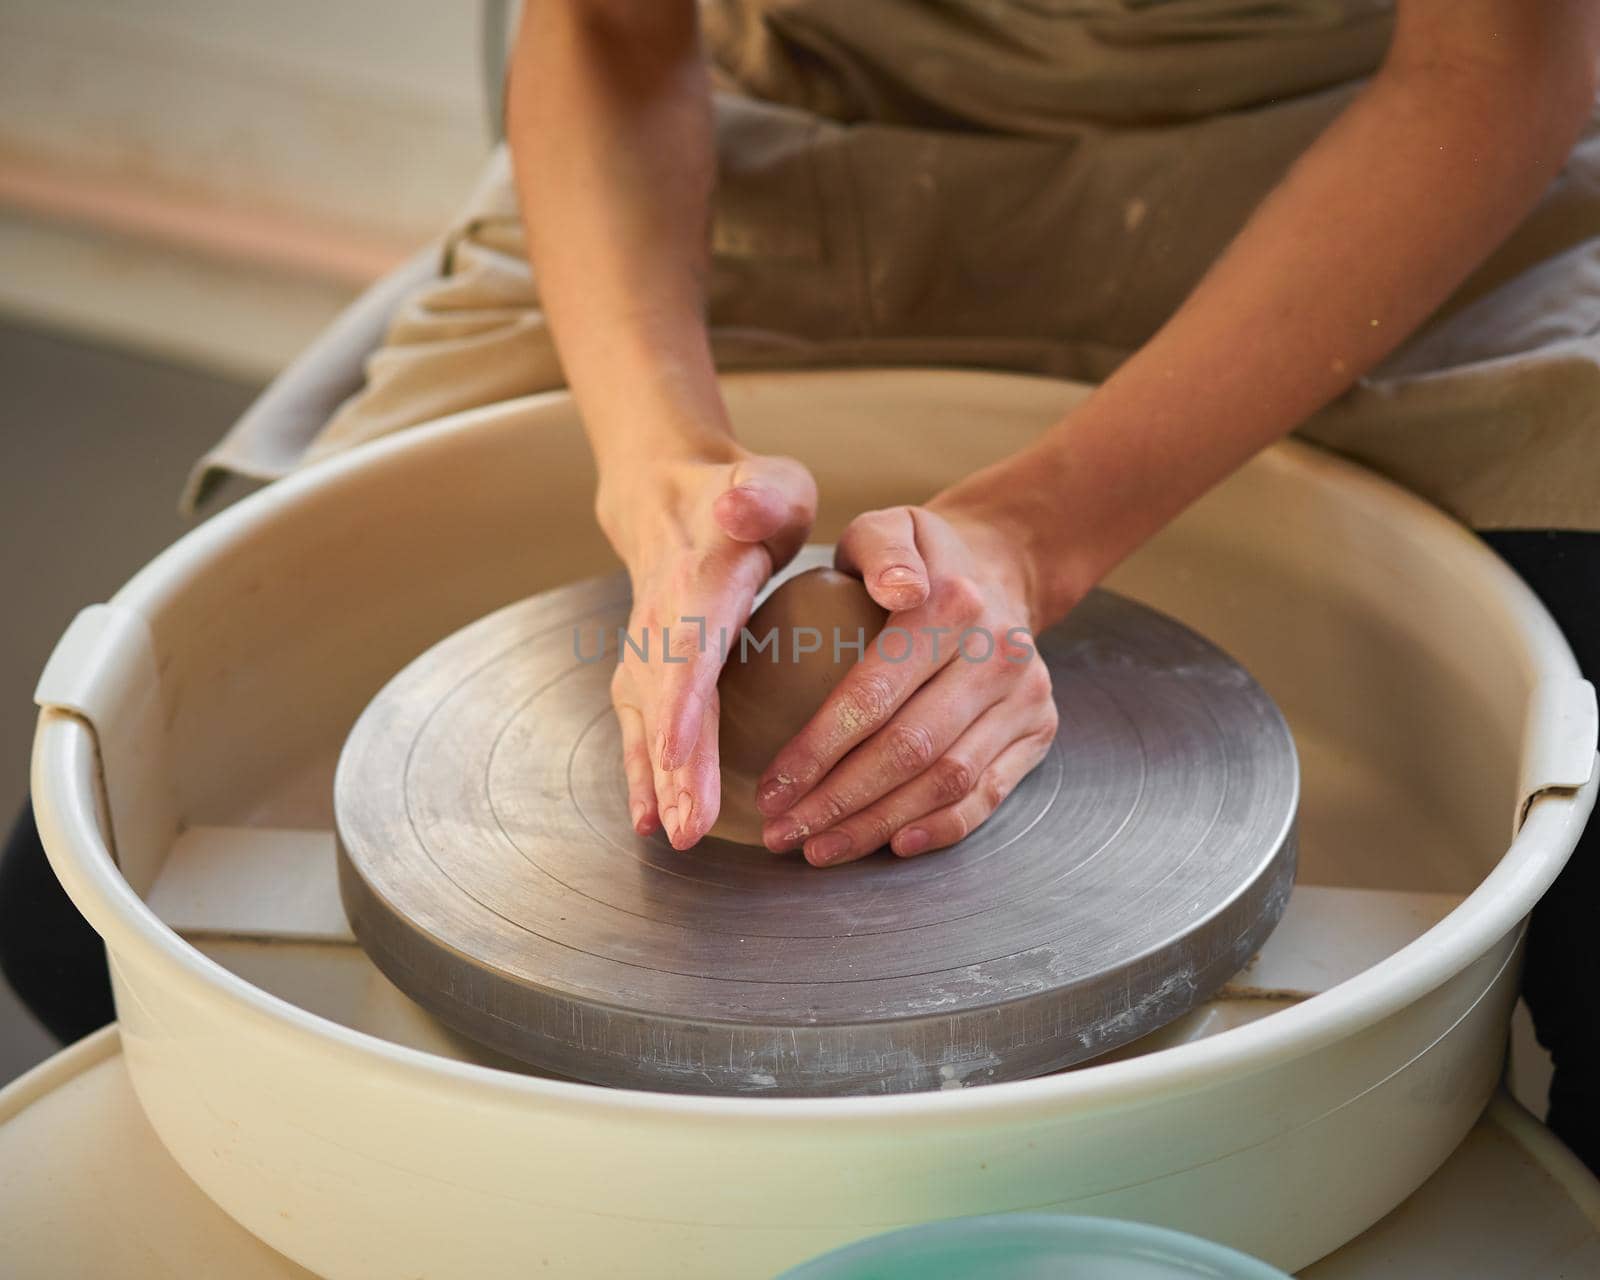 Woman making ceramic pottery on wheel, creation of ceramic ware. Concept for small business or hobby